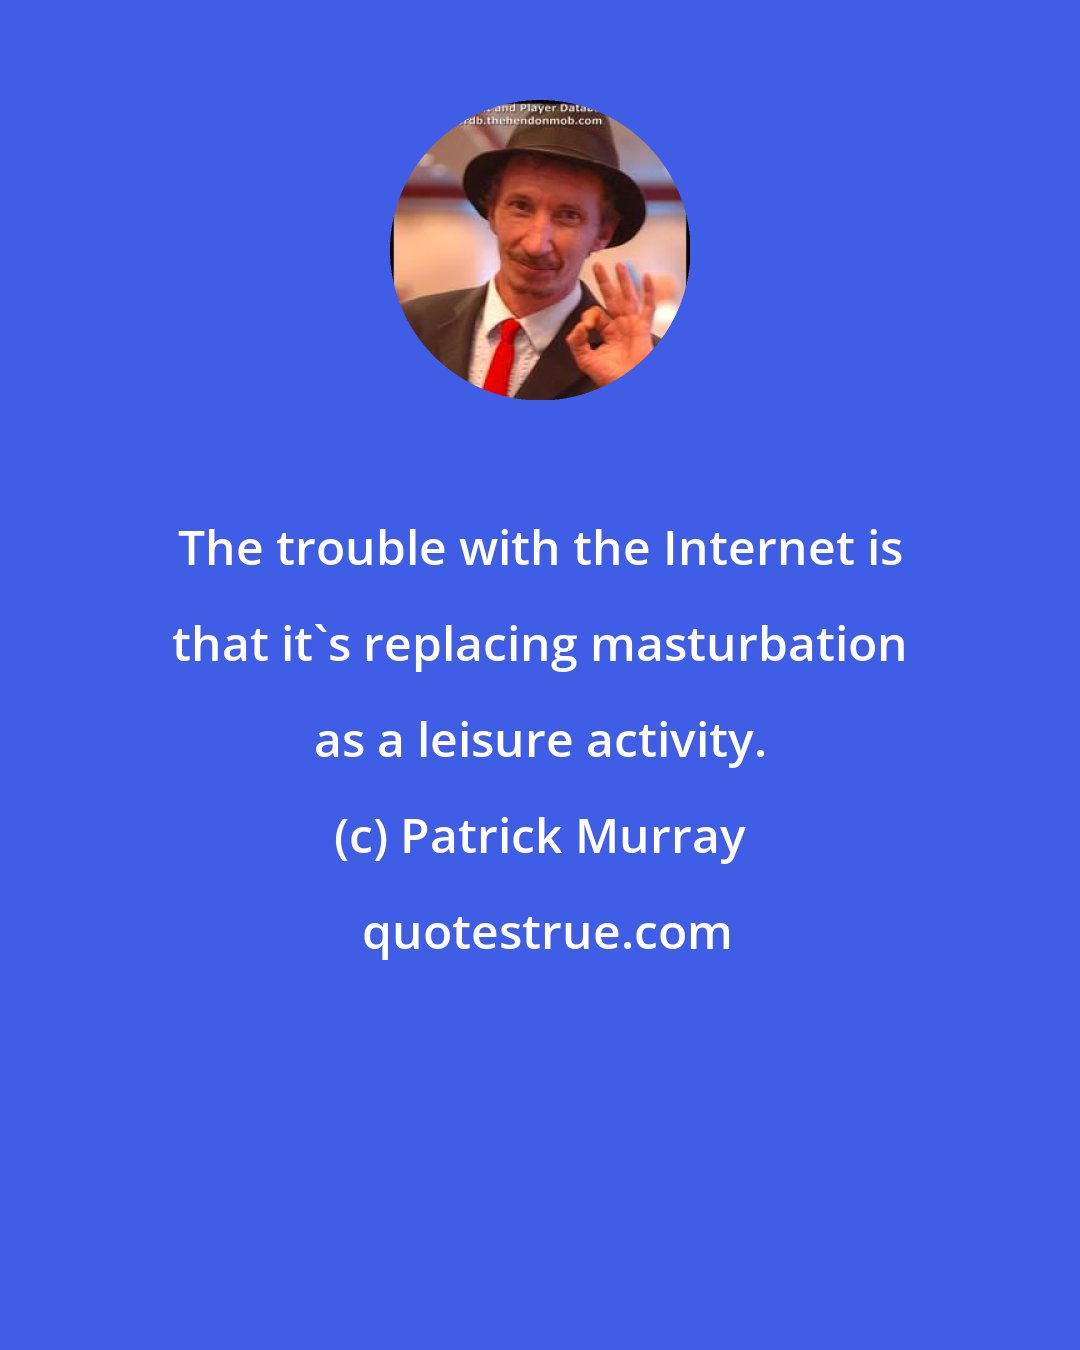 Patrick Murray: The trouble with the Internet is that it's replacing masturbation as a leisure activity.